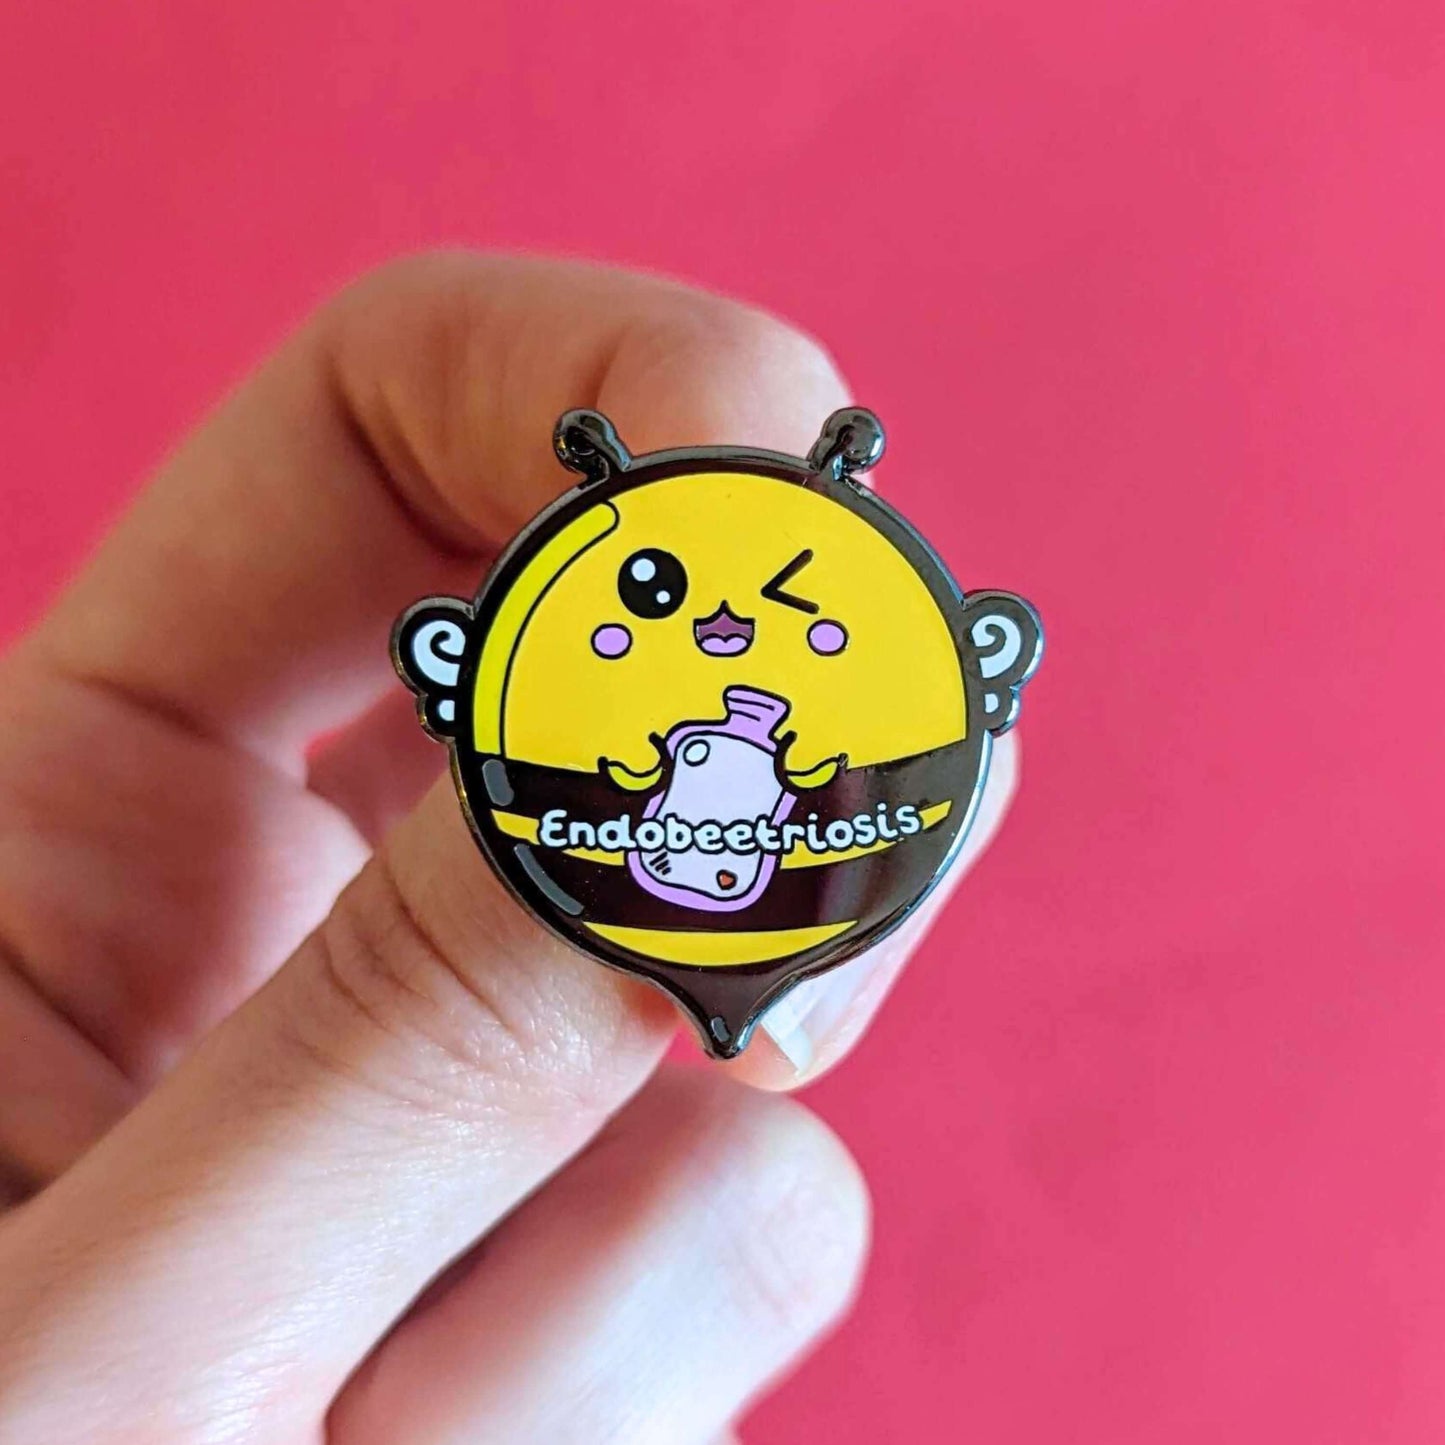 Endobeetriosis 2.0 Bee Enamel Pin - Endometriosis held over a red background. The enamel pin is a bumble bee with a smiley face and holding a pink hot watterbottle in its hands, across its middle is white text that reads endobeetriosis. The enamel pin is designed to raise awareness for endometriosis